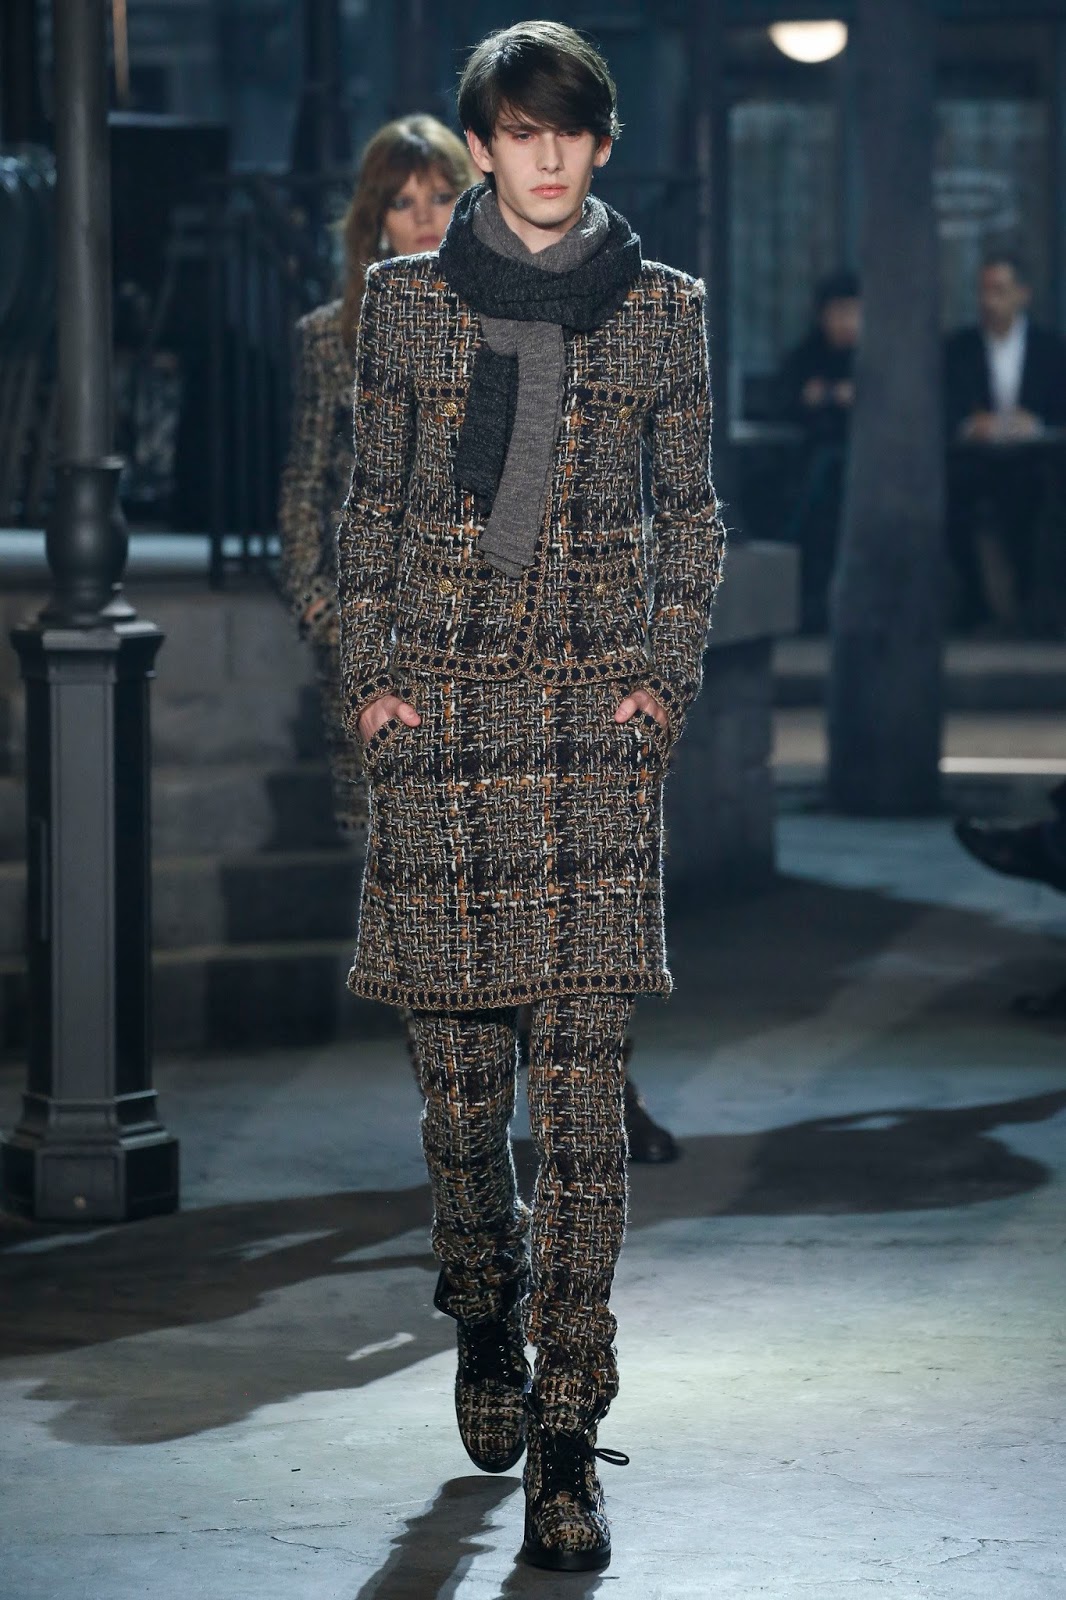 Chanel Menswear Collection Fashion Show Details Repined by